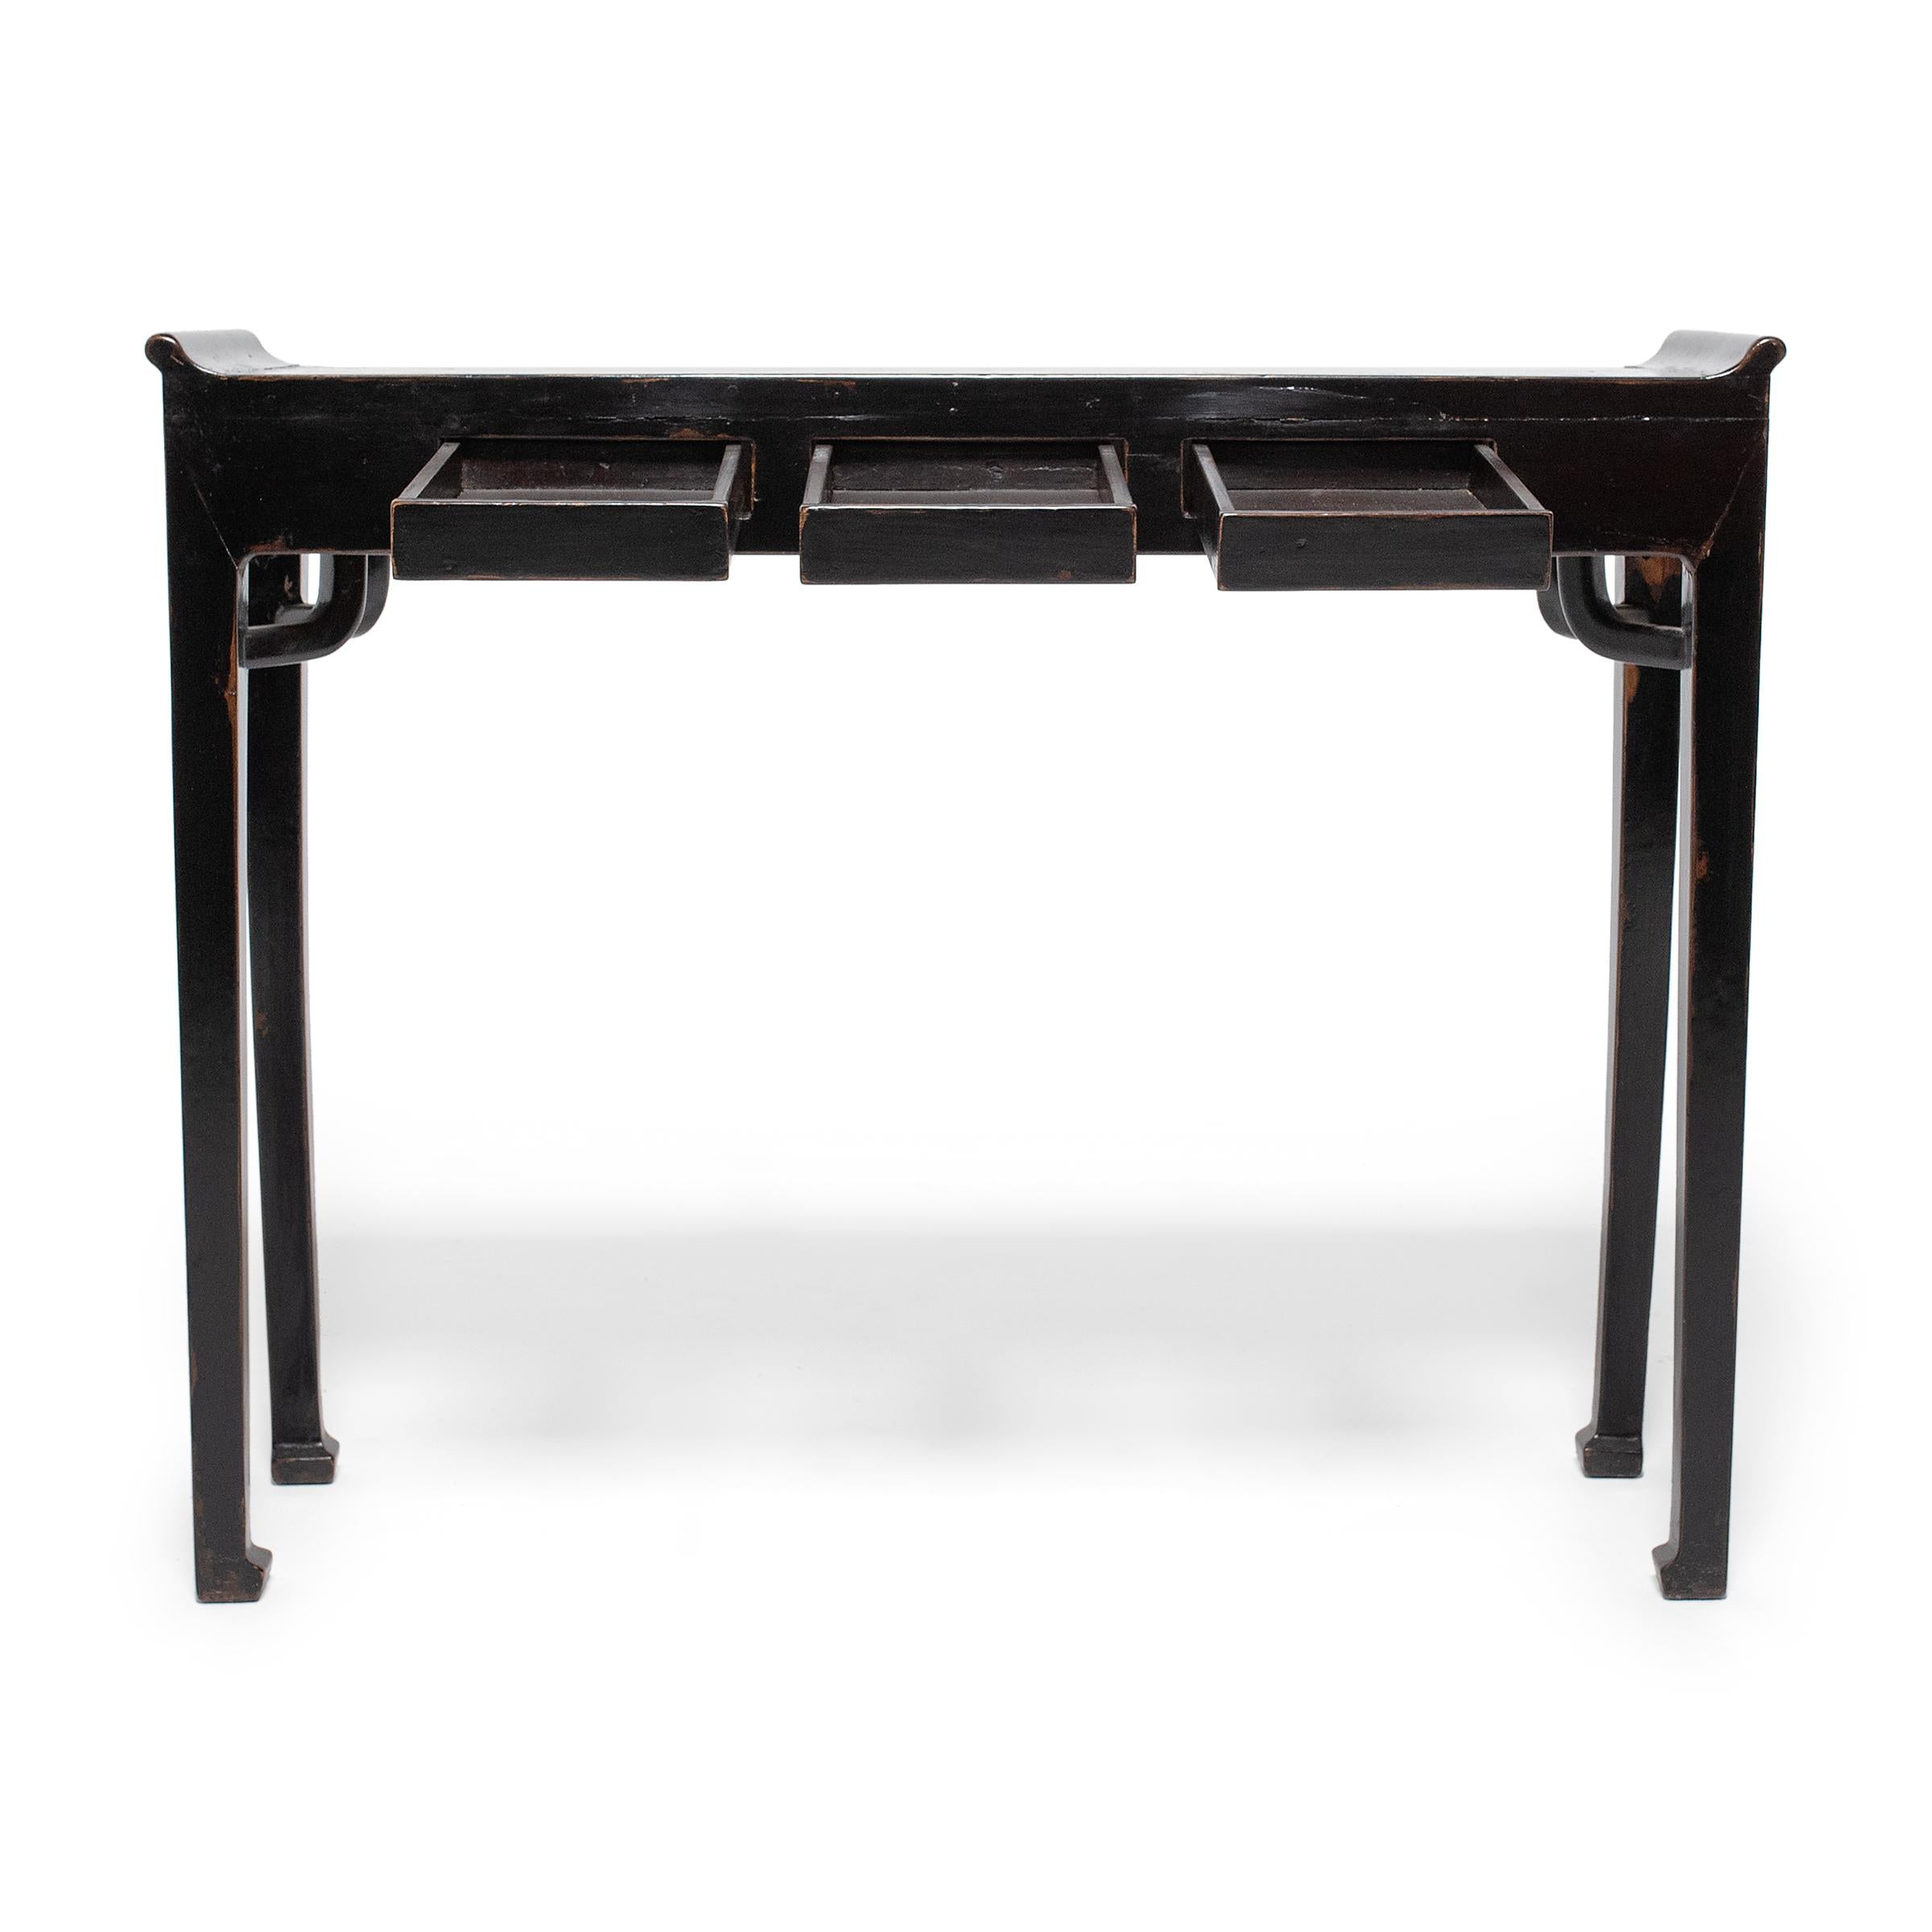 Minimalist Chinese Black Lacquer Altar Table with Hidden Drawers, c. 1900